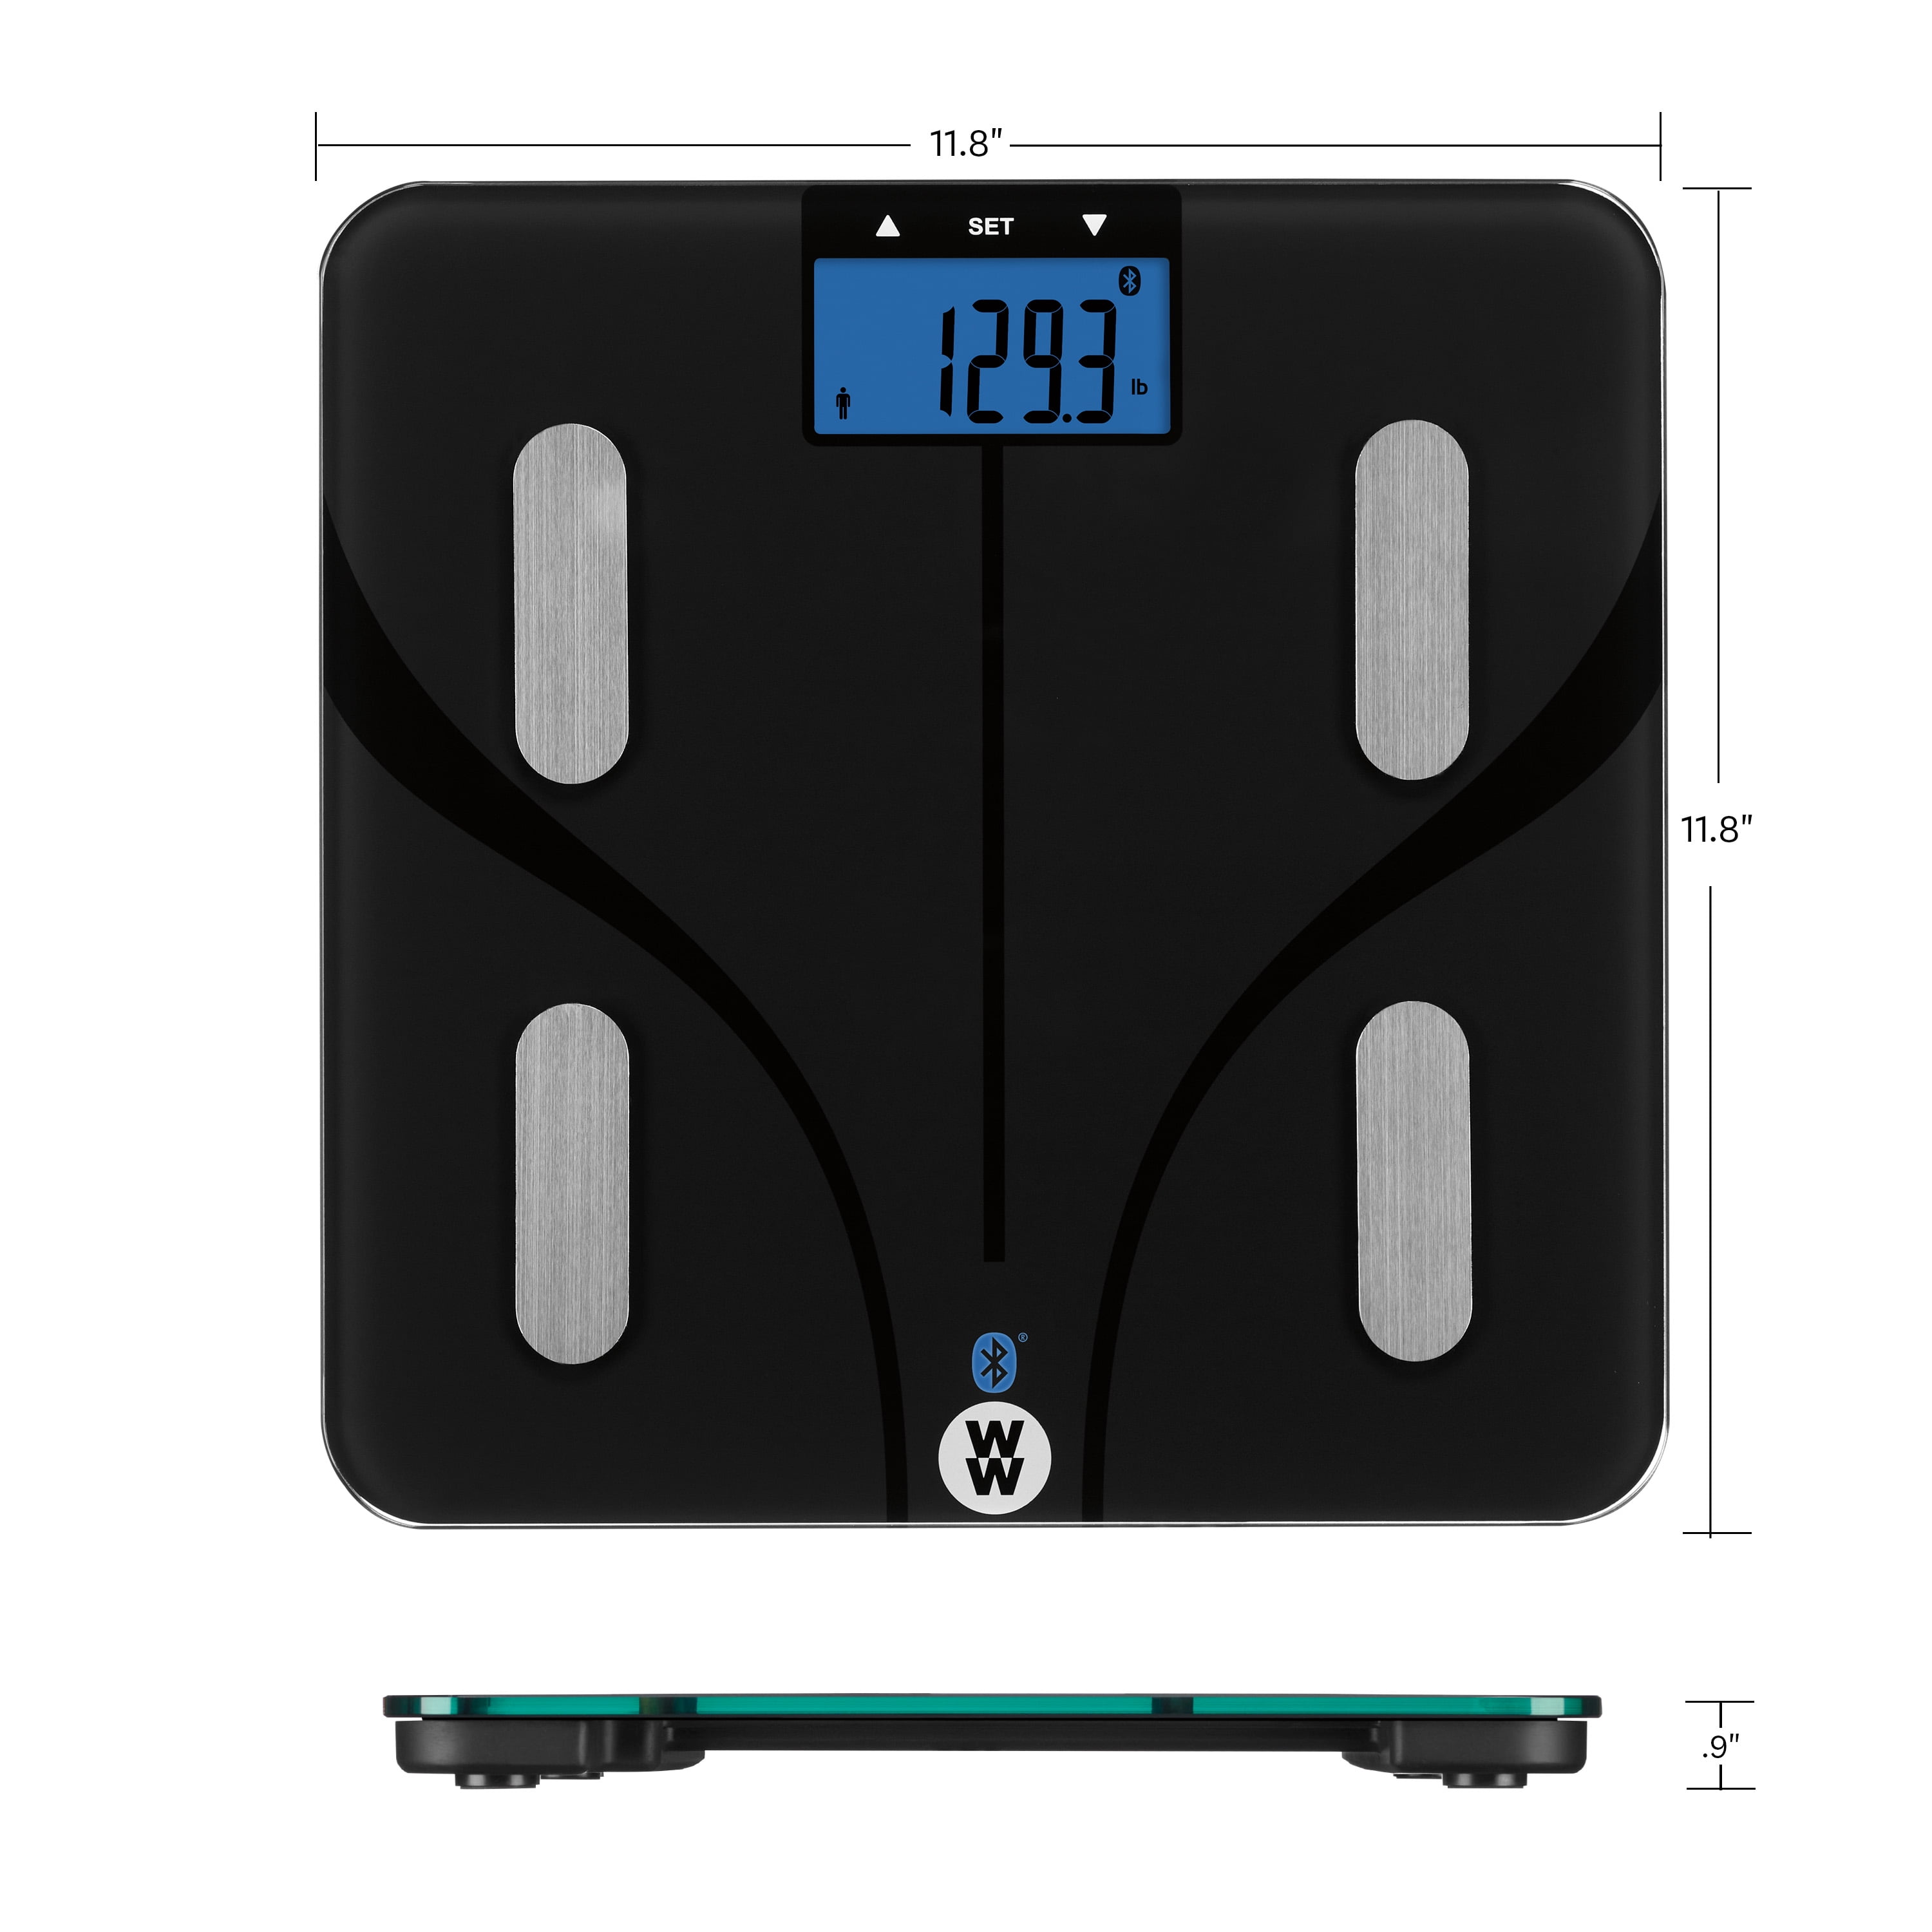 Conair SocialMedia on Instagram: Take control of your wellness journey  with the WW™ Bluetooth Body Weight Scale from Conair. 🌟 Sync and monitor  your progress effortlessly with the Bluetooth® connection and the